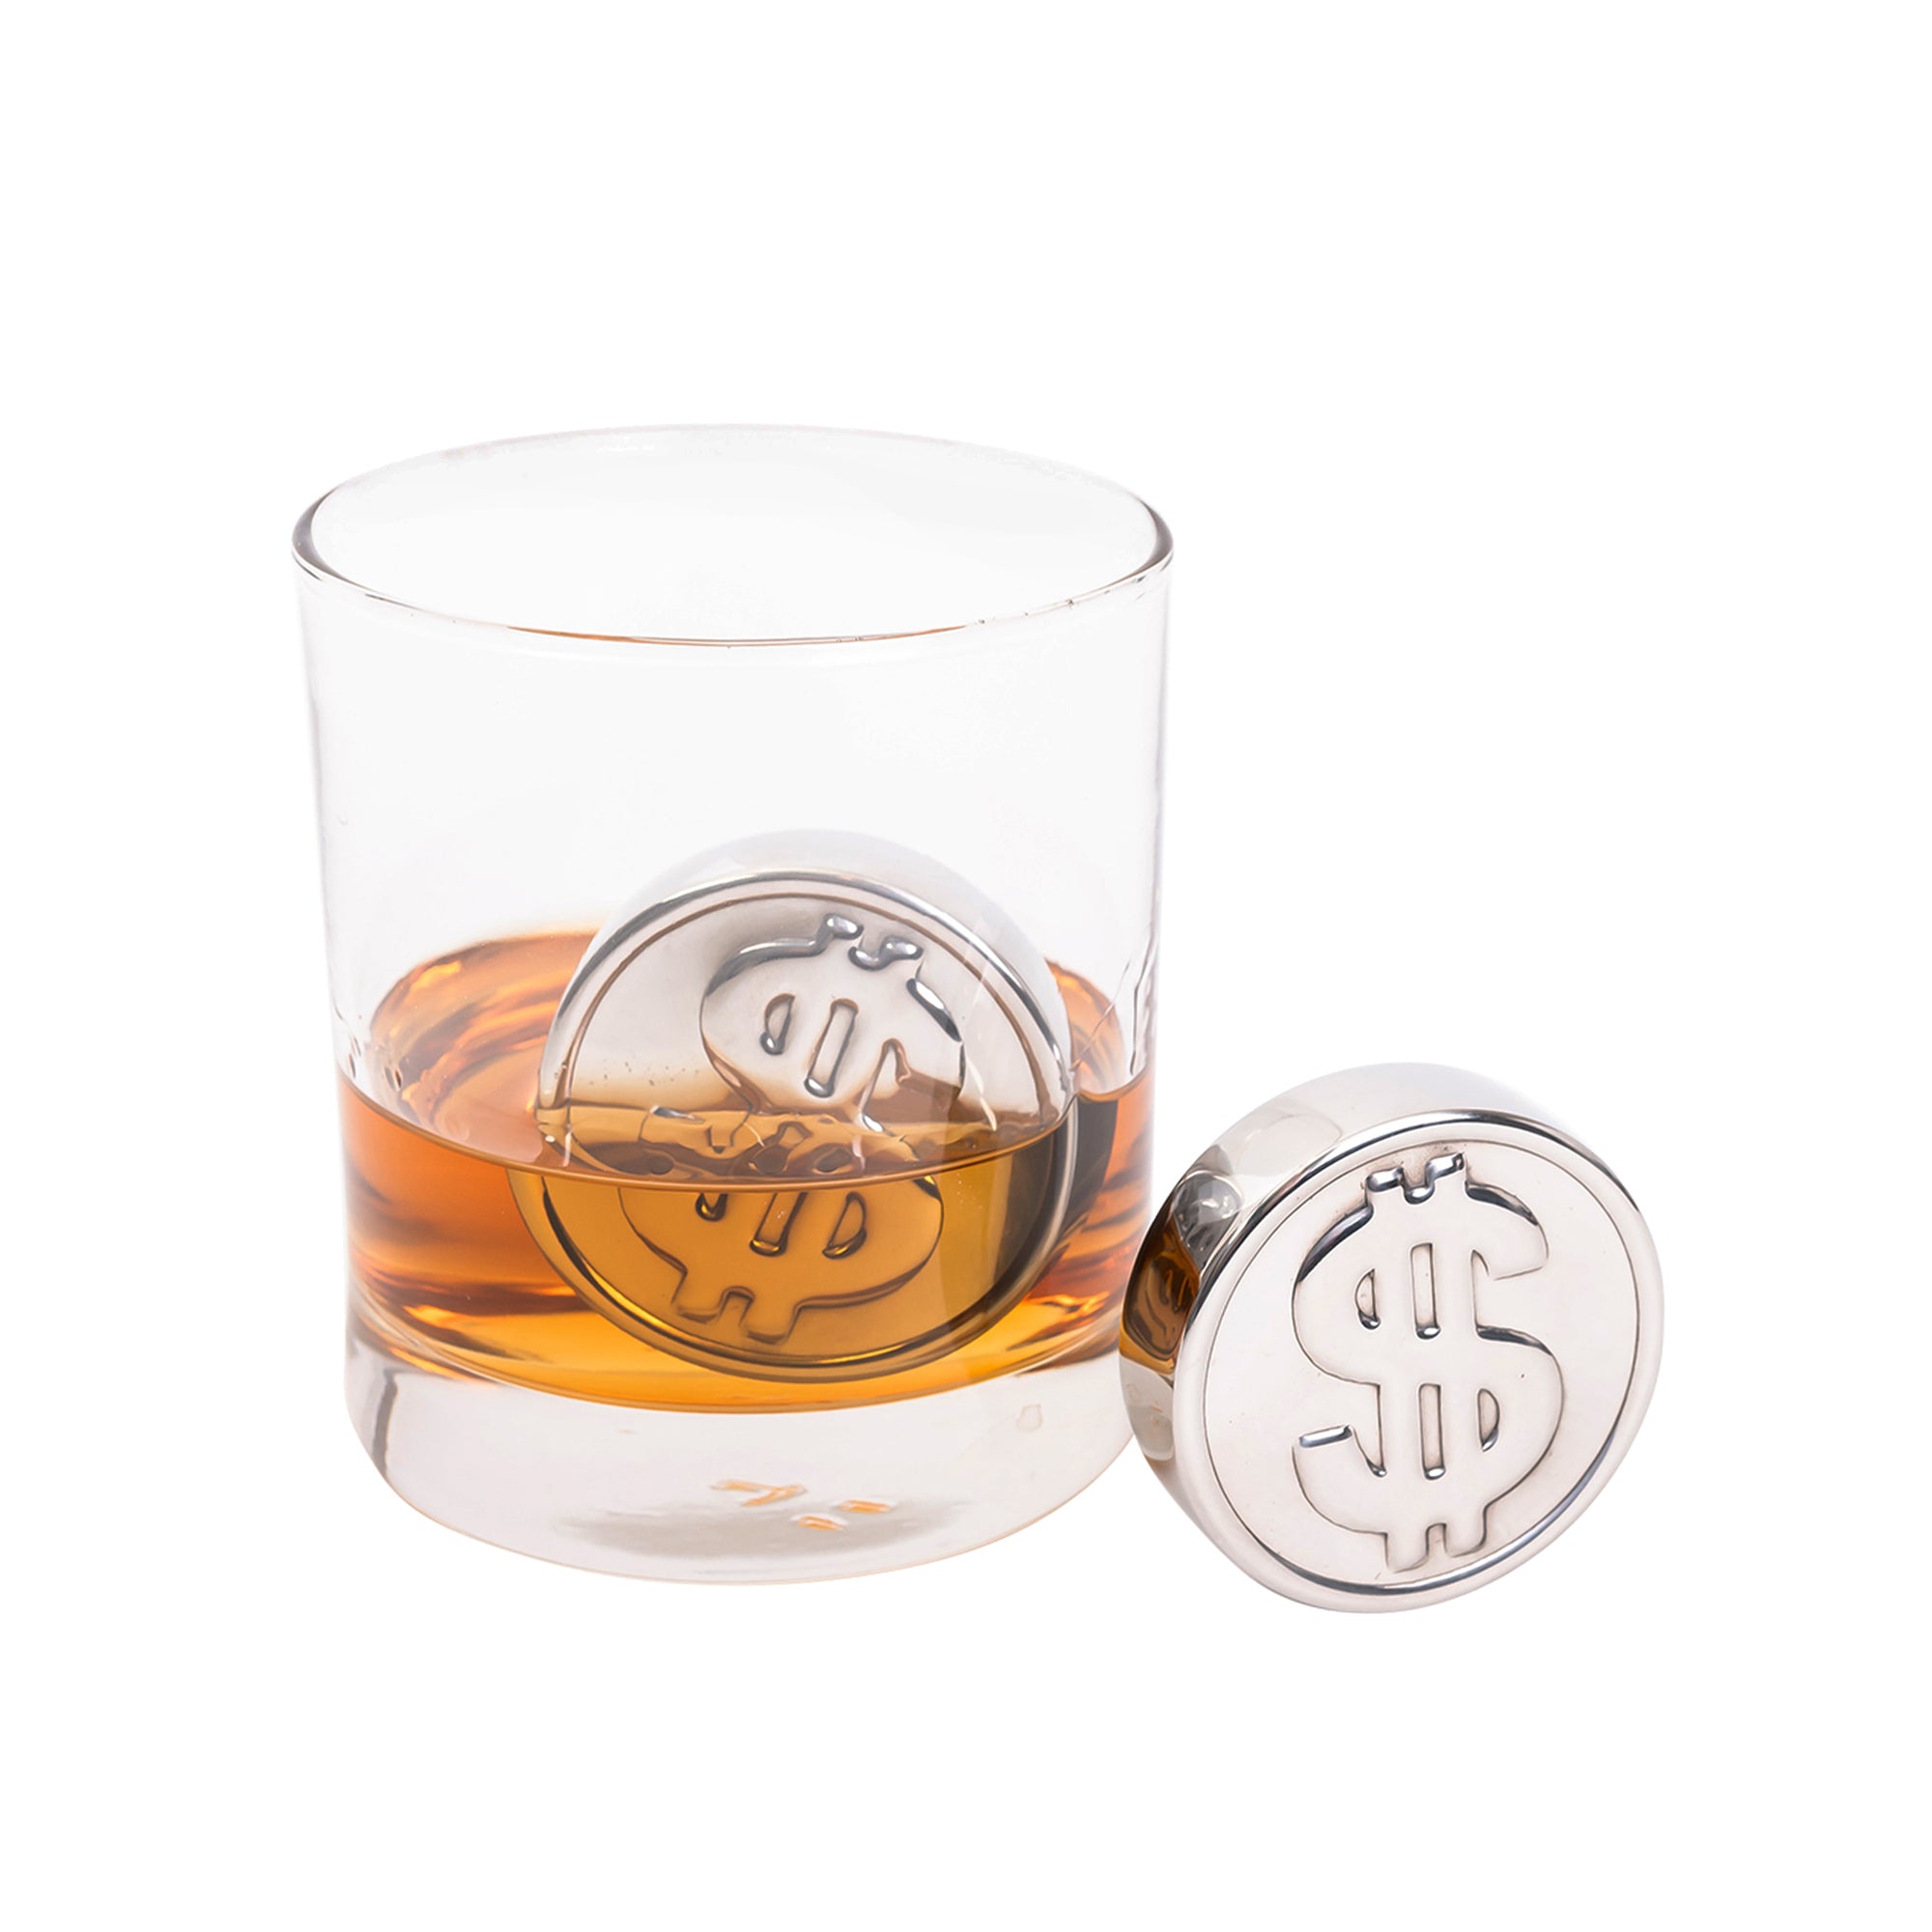 Whiskey Cubes - Coin